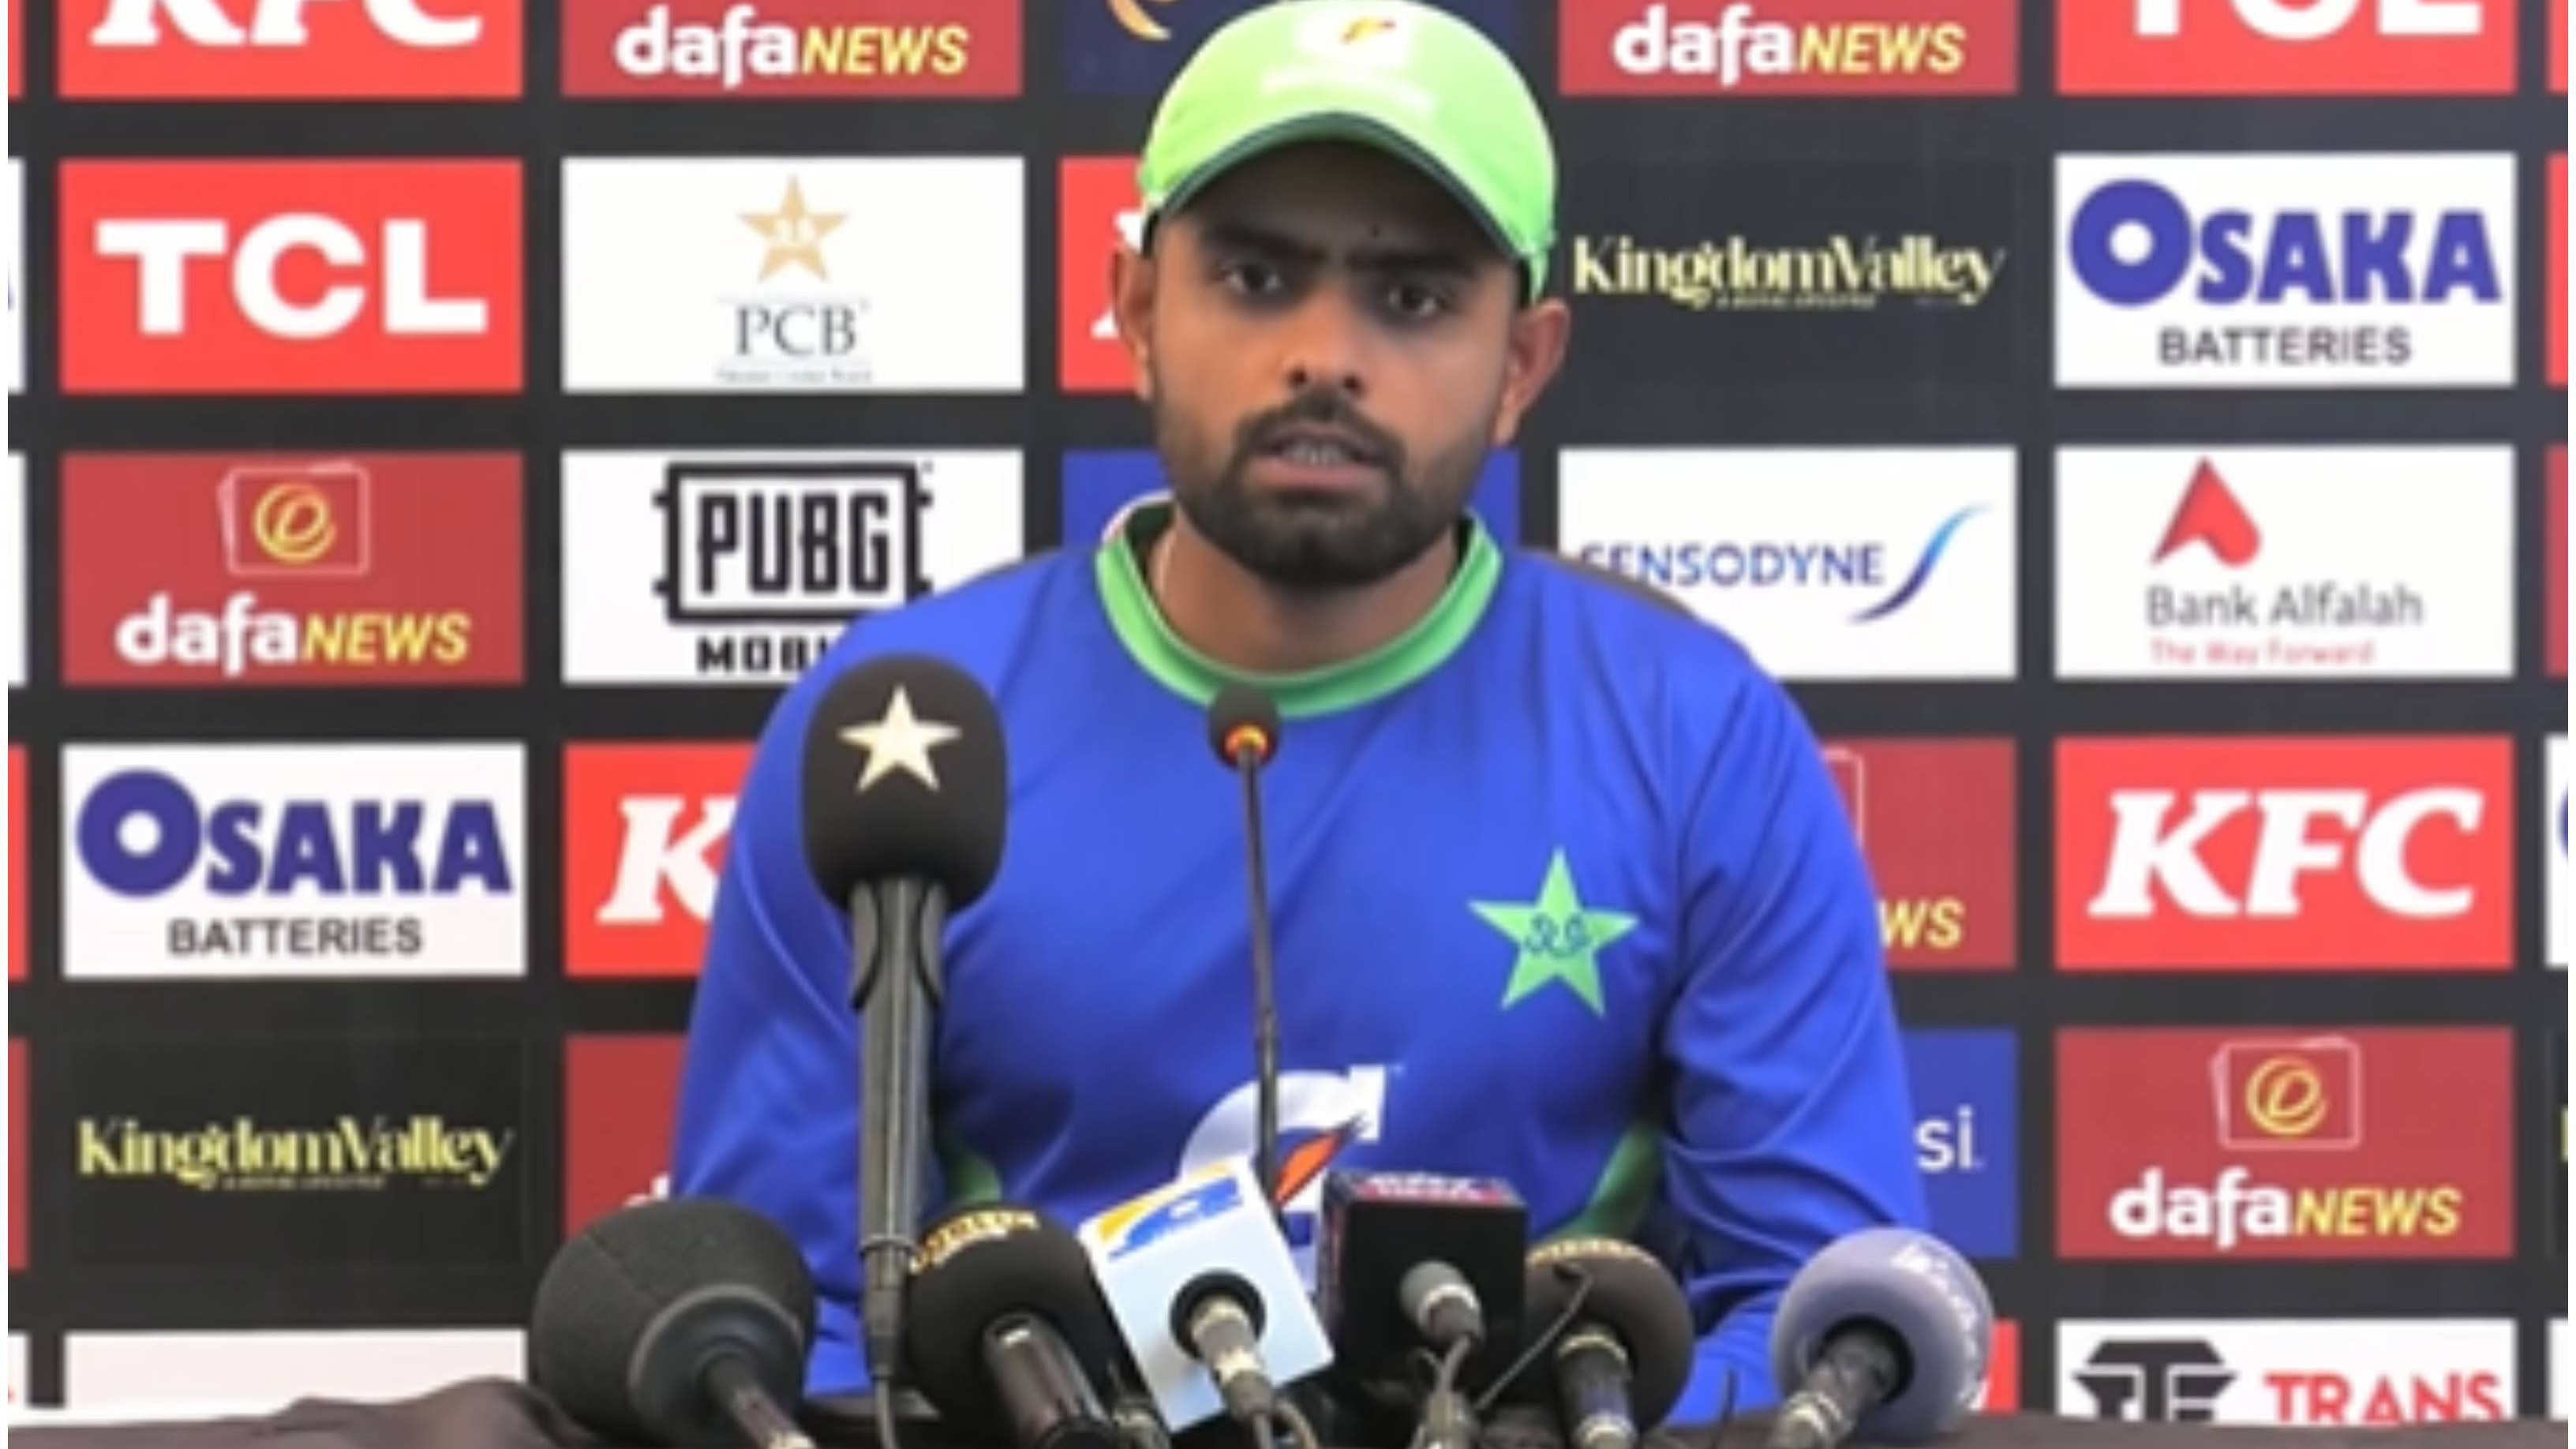 PAK v ENG 2022: “Excited about prospect of playing the WTC final,” Babar Azam ahead of England Test series